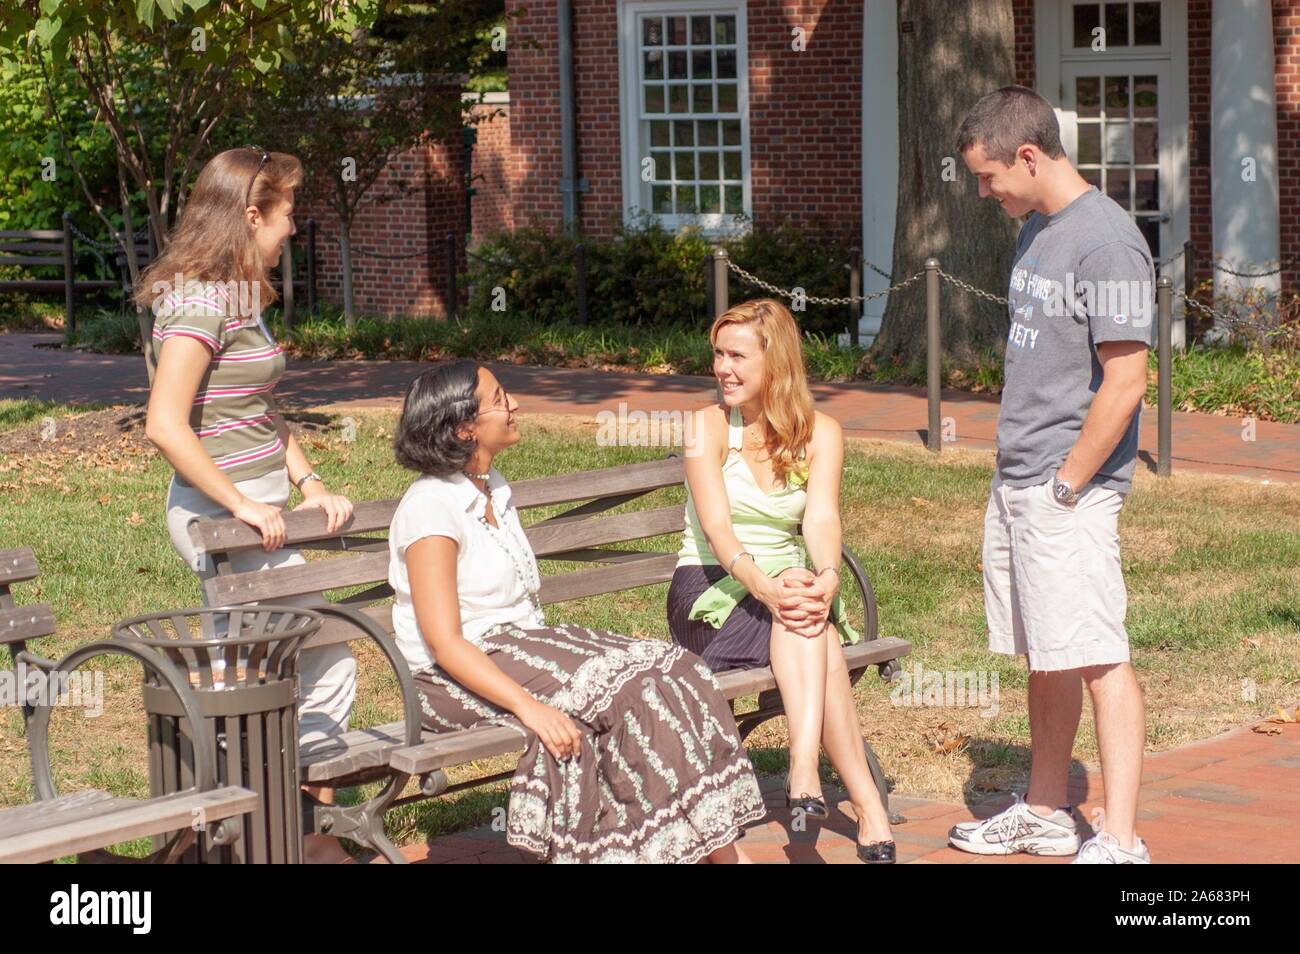 Students, outside on a sunny day, chatting while sitting on benches and standing nearby, on the grounds of the Johns Hopkins University, Baltimore, Maryland, September 19, 2005. From the Homewood Photography Collection. () Stock Photo